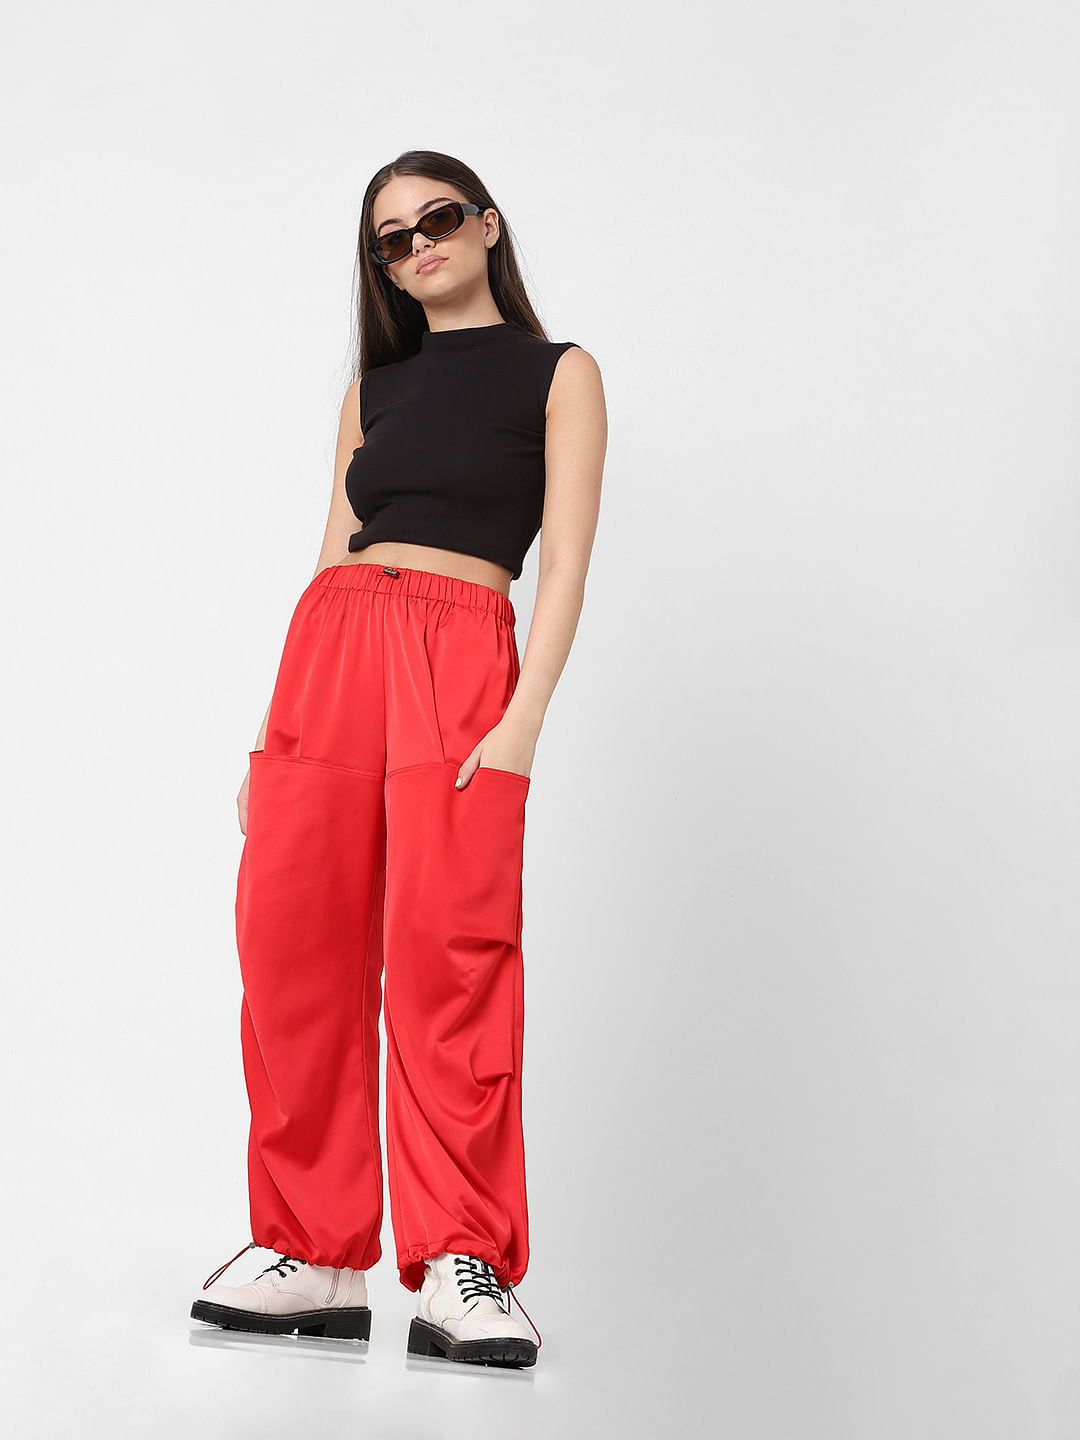 Buy Black High Rise Floral Pants For Women Online in India  VeroModa